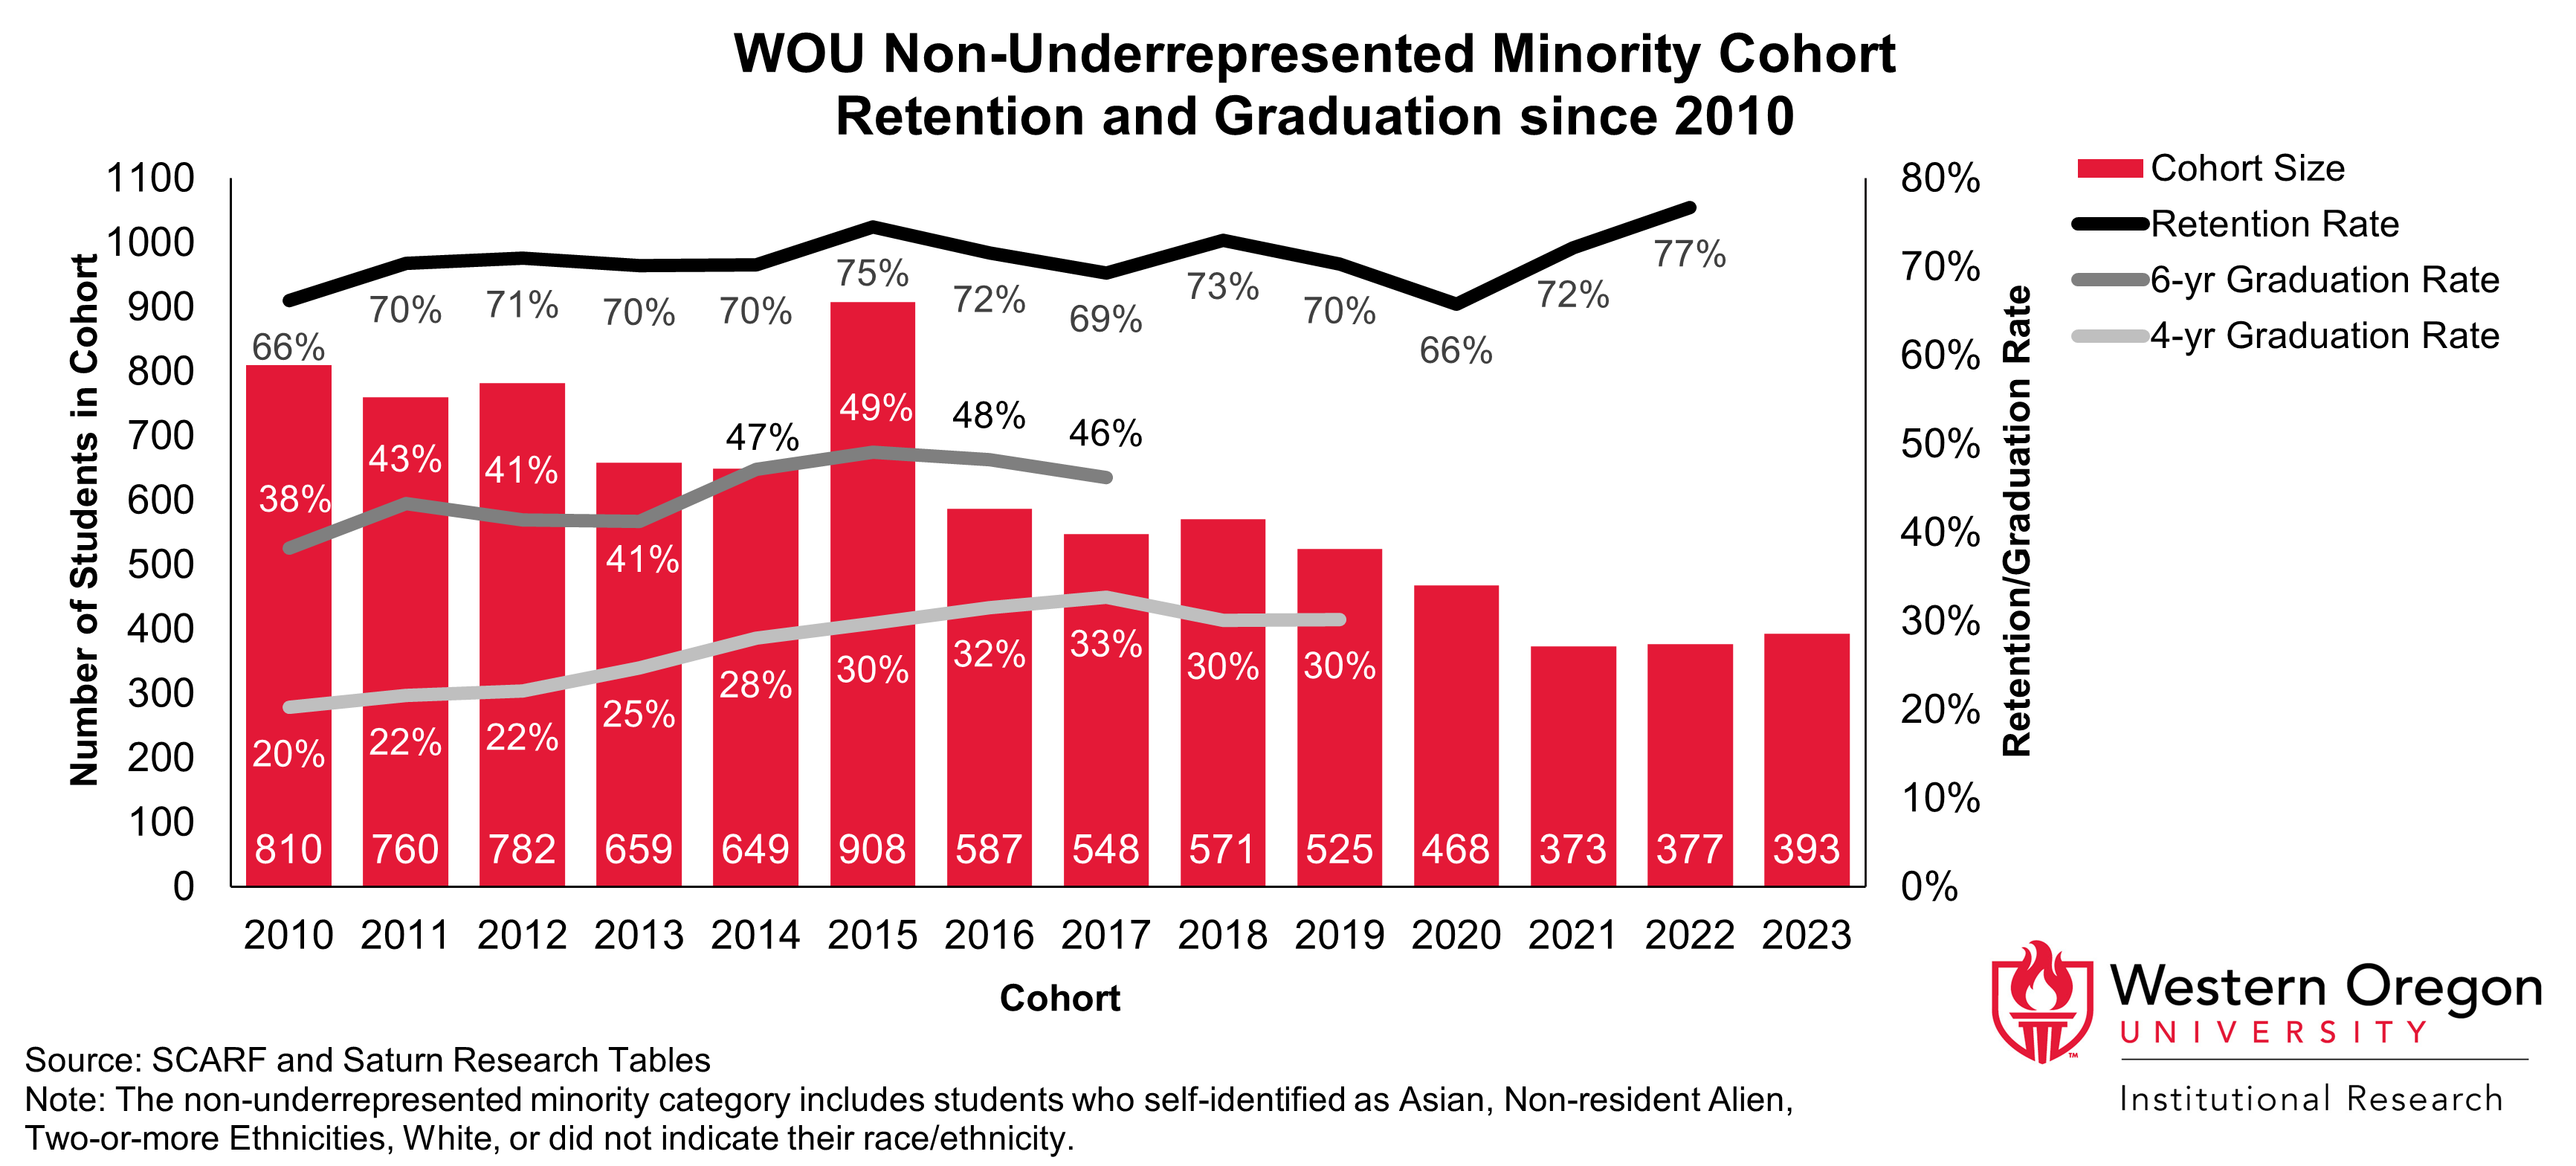 Bar and line graph of retention and 4- and 6-year graduation rates since 2010 for WOU students from underrepresented minority groups, showing that graduation and retention rates have increased overall.